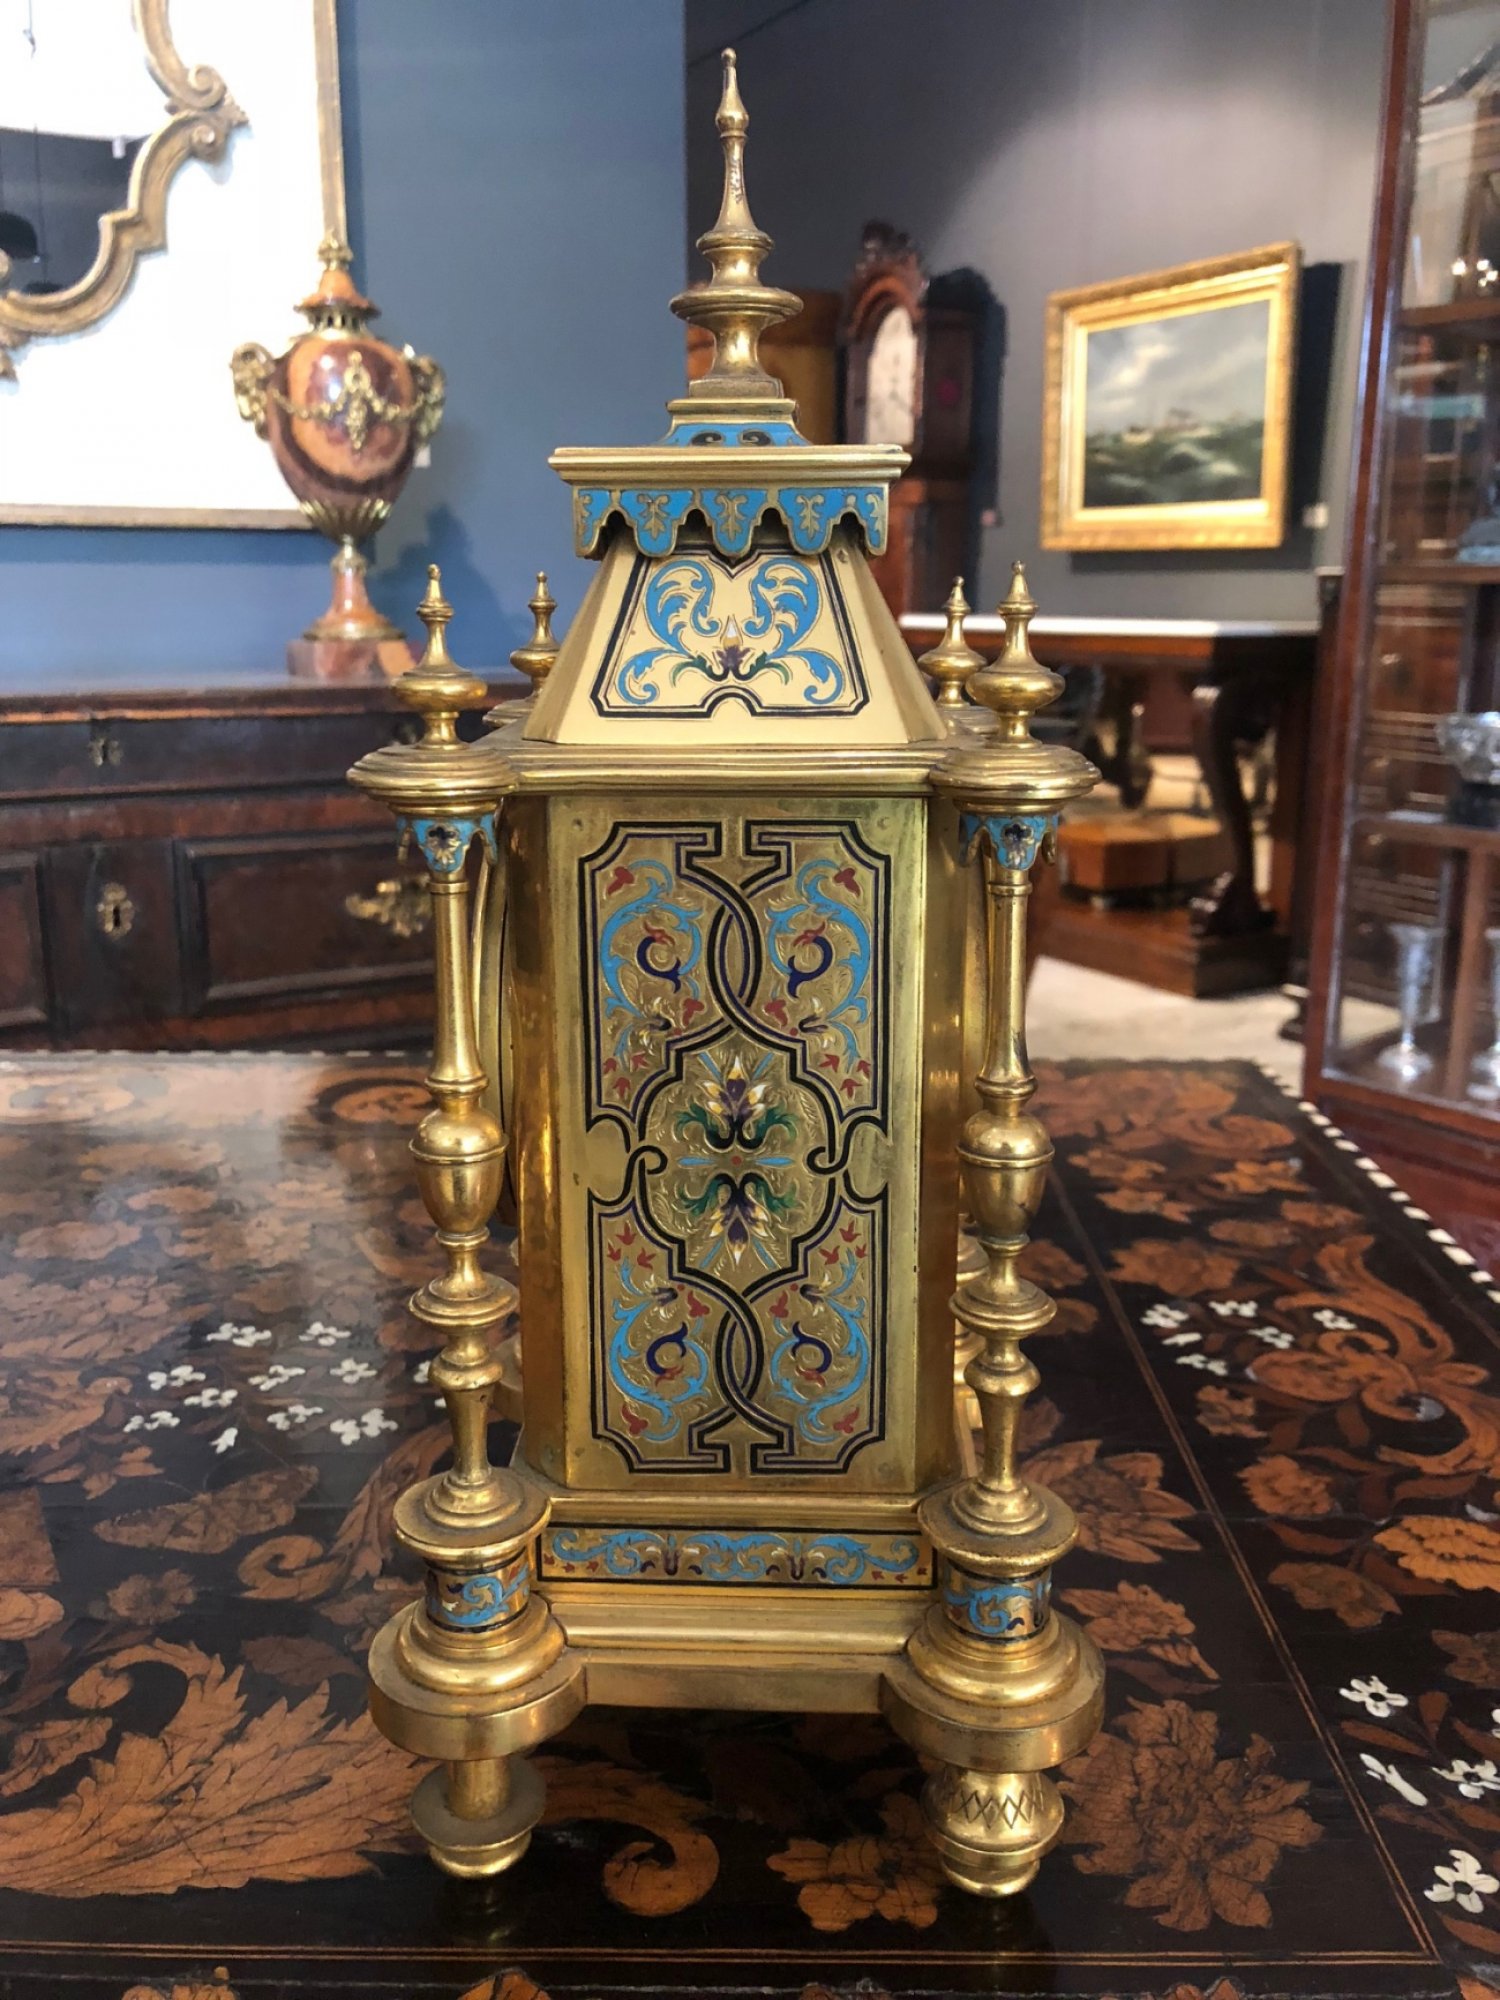 Late 19th Century French Enamel Mantle Clock